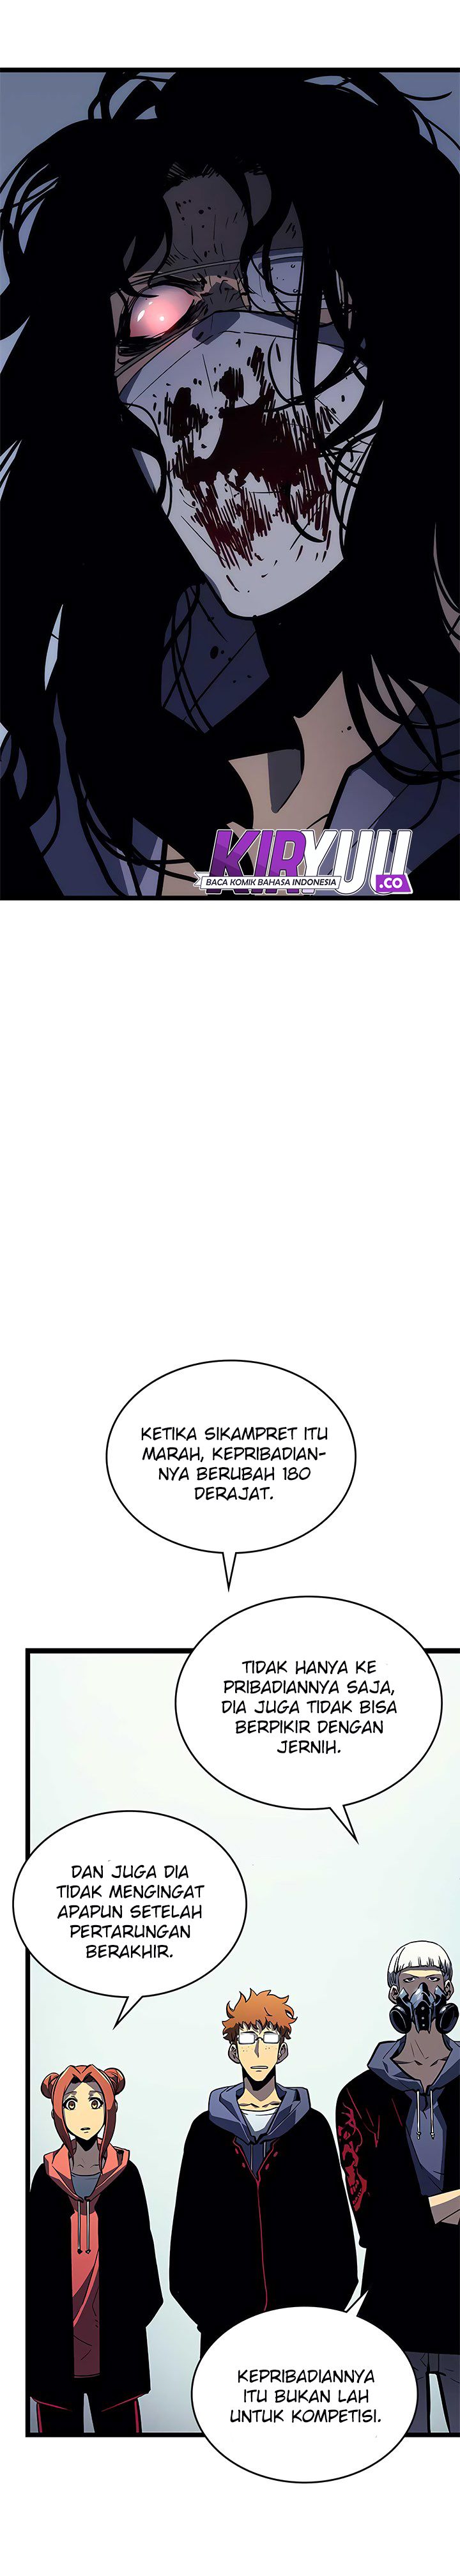 Solo Leveling Chapter 92